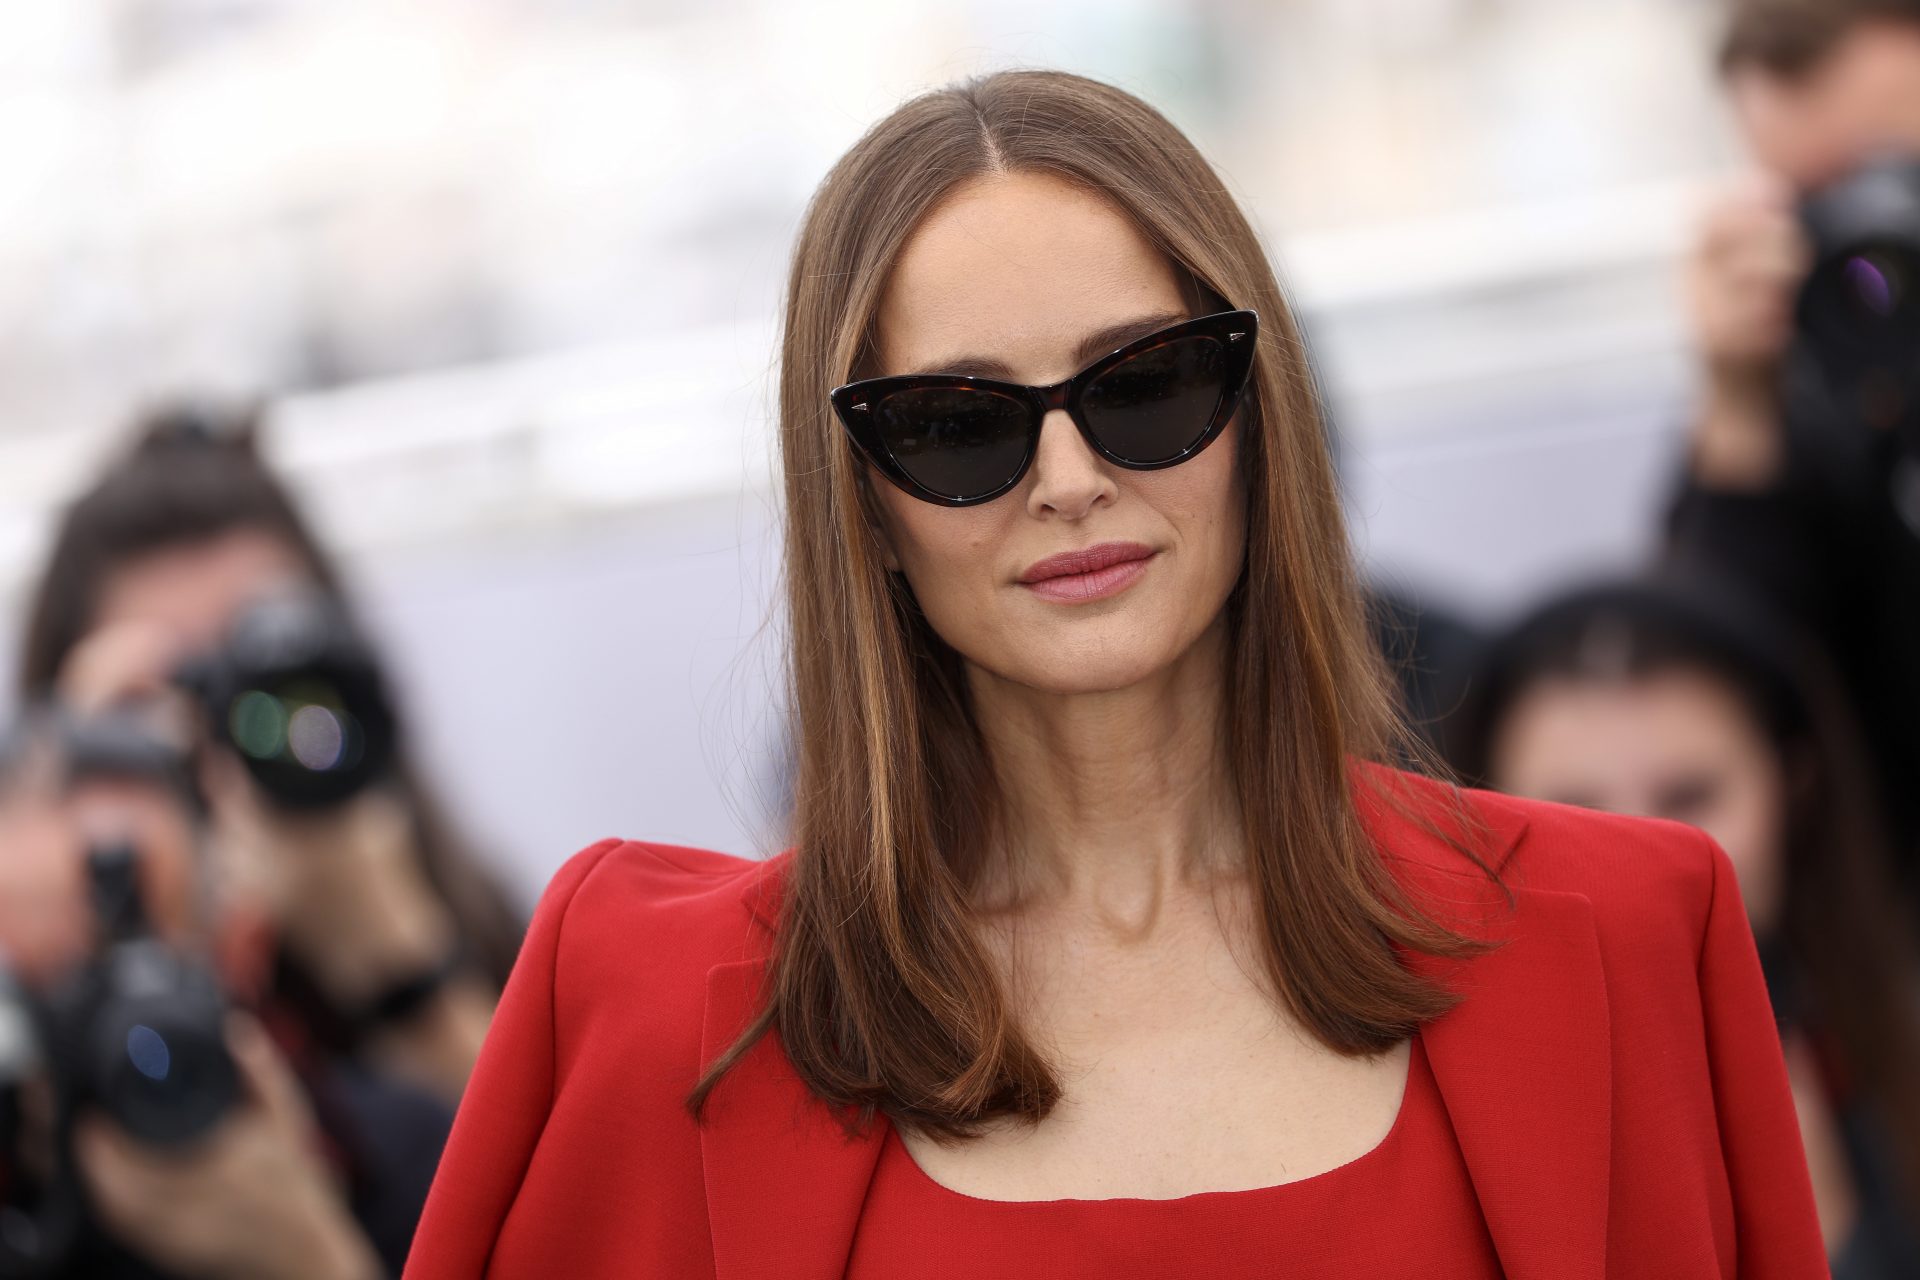 What does Natalie Portman have to do with a Spanish soccer scandal?